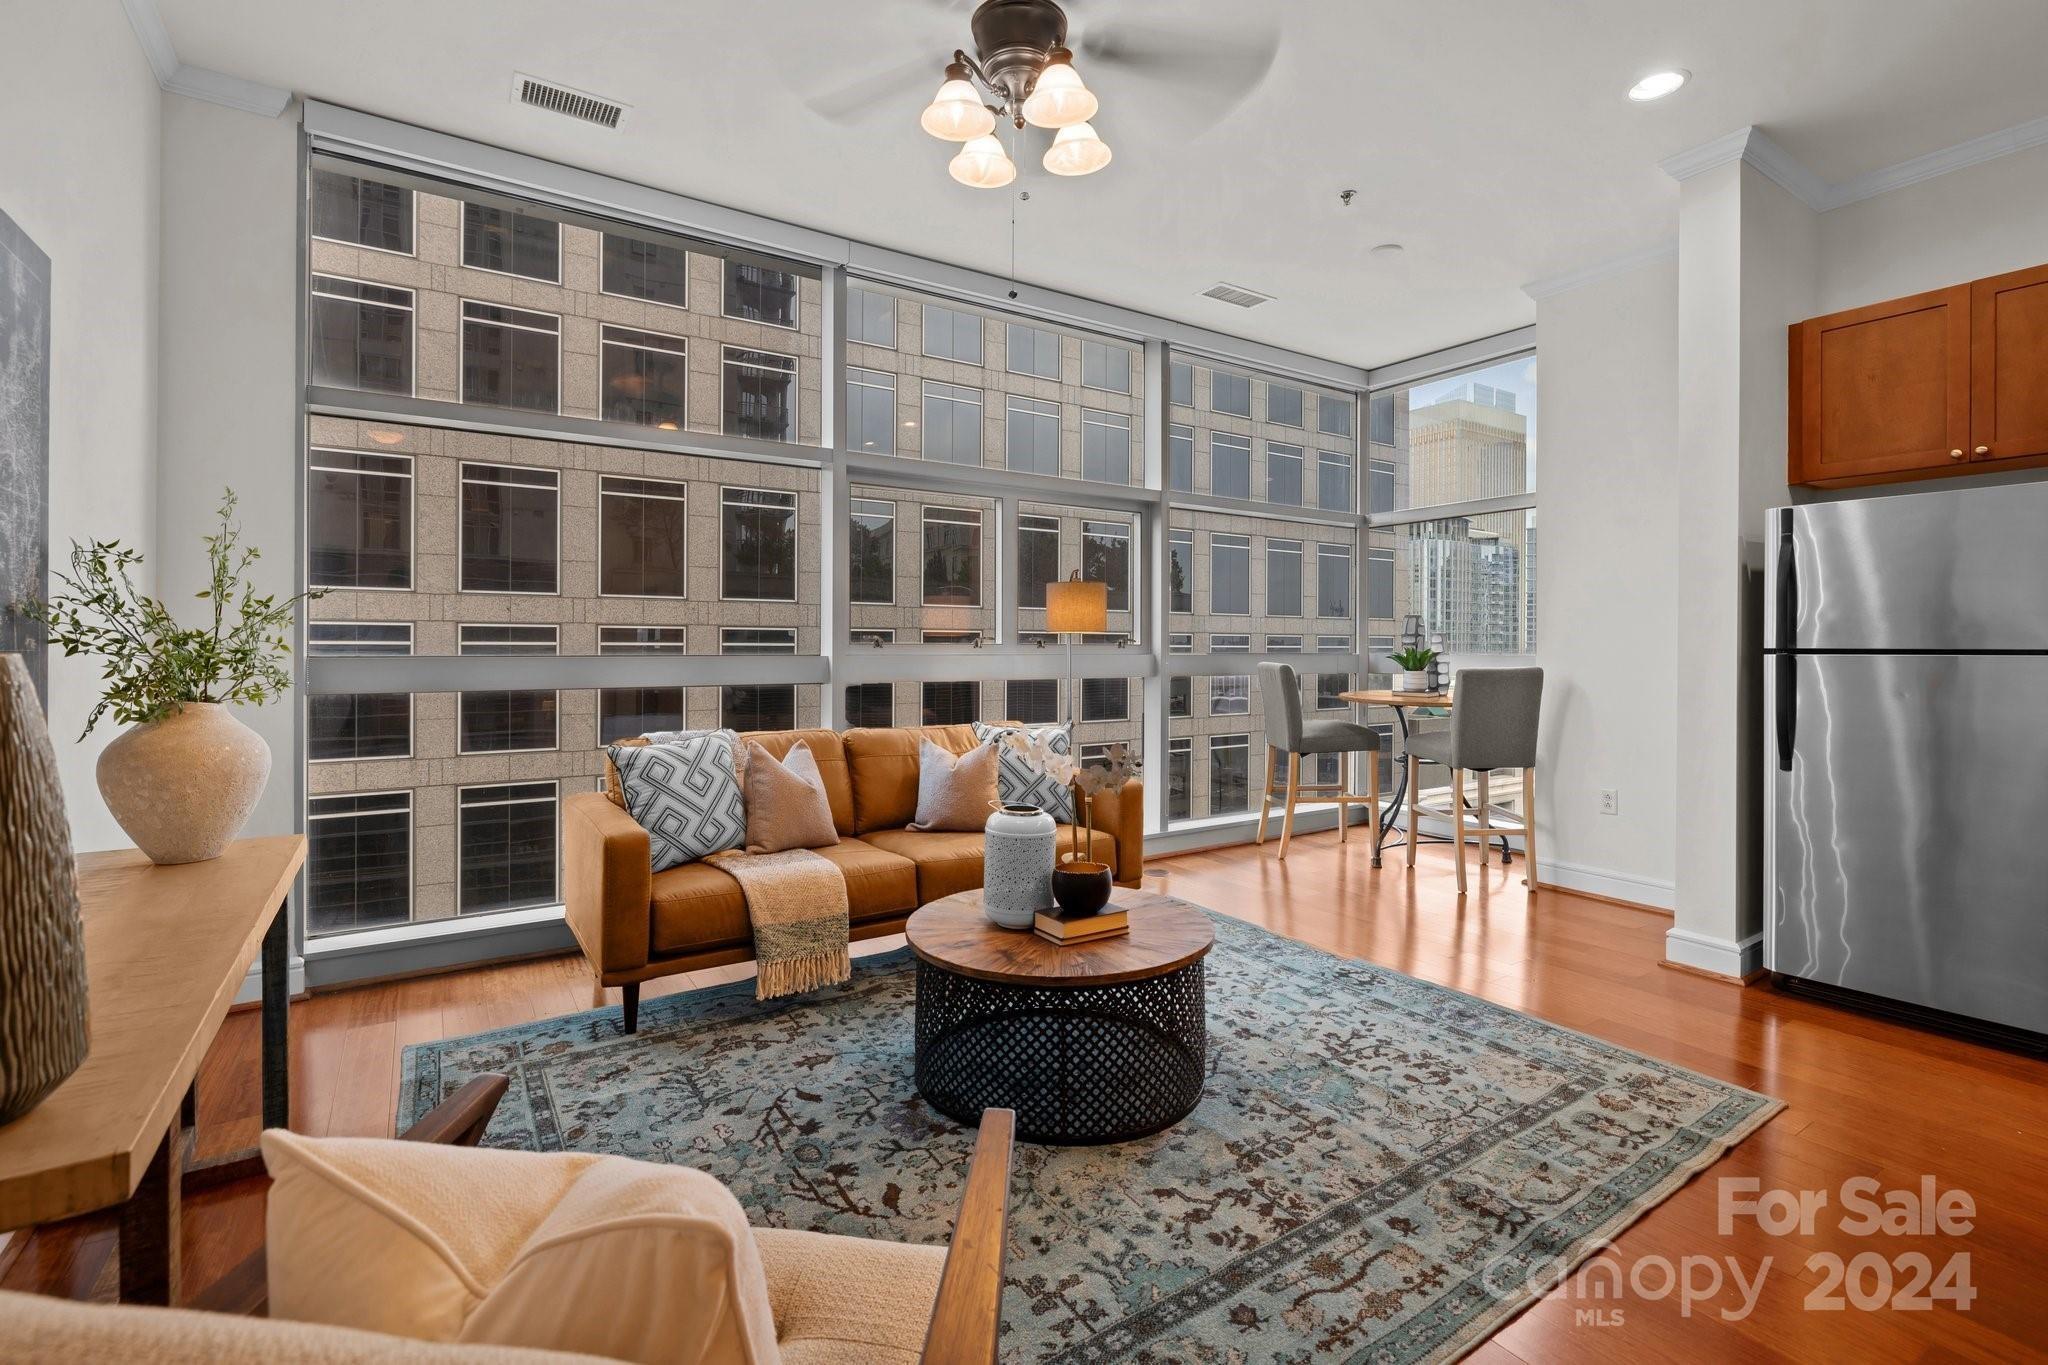 Property Image for 333 W Trade Street 600